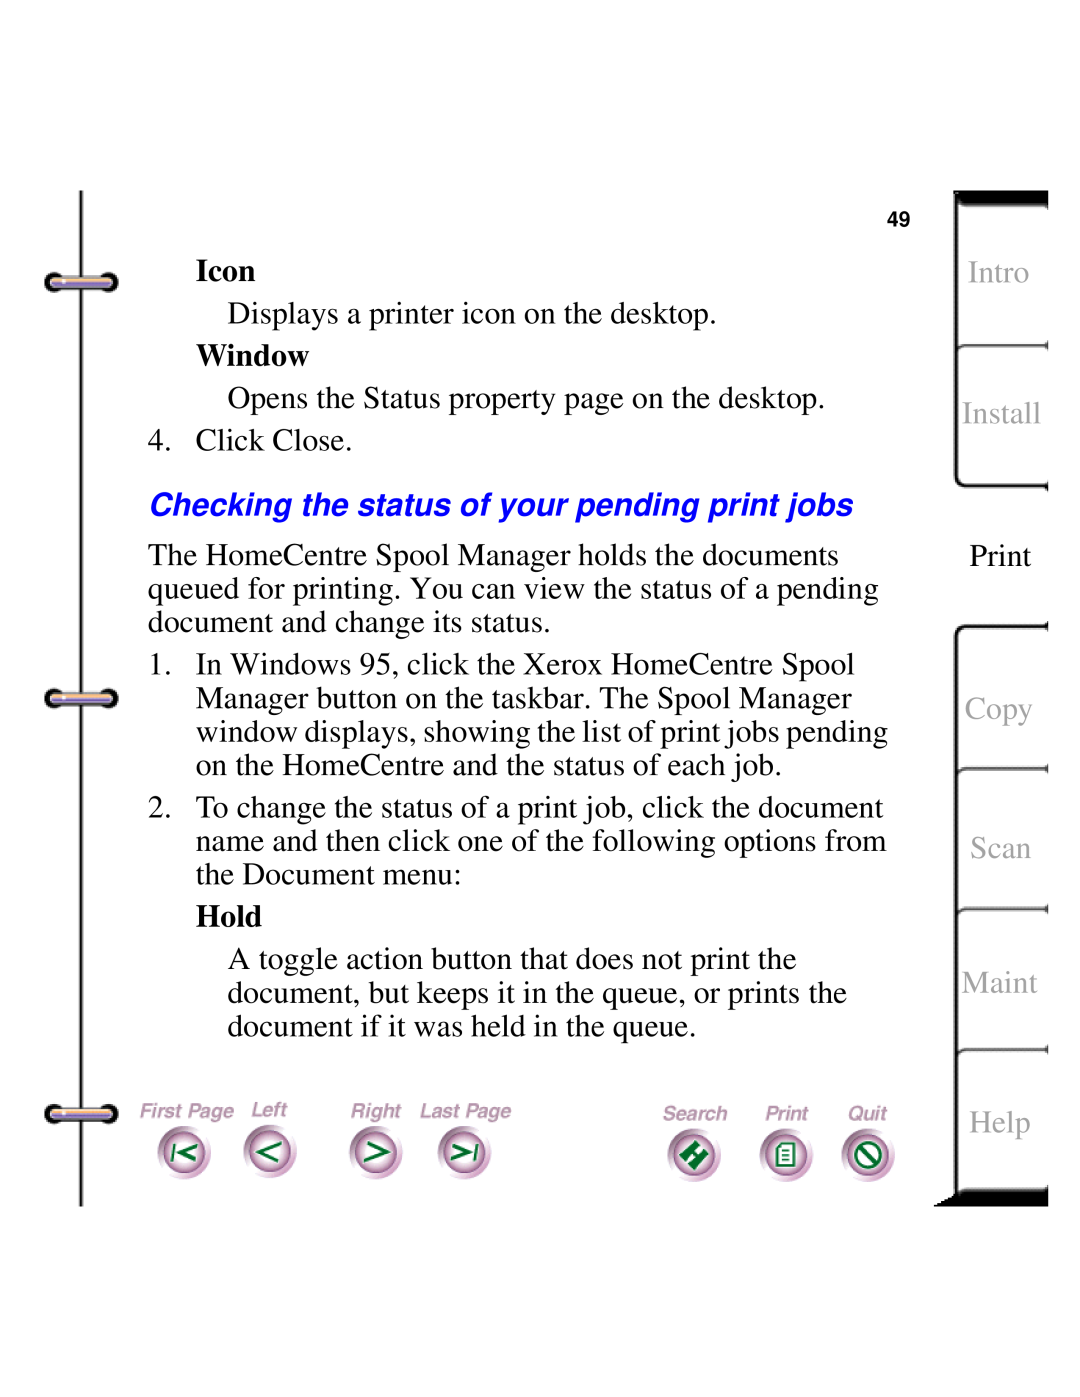 Xerox Document HomeCentre manual Checking the status of your pending print jobs, Icon, Window, Hold, Intro Install, Help 